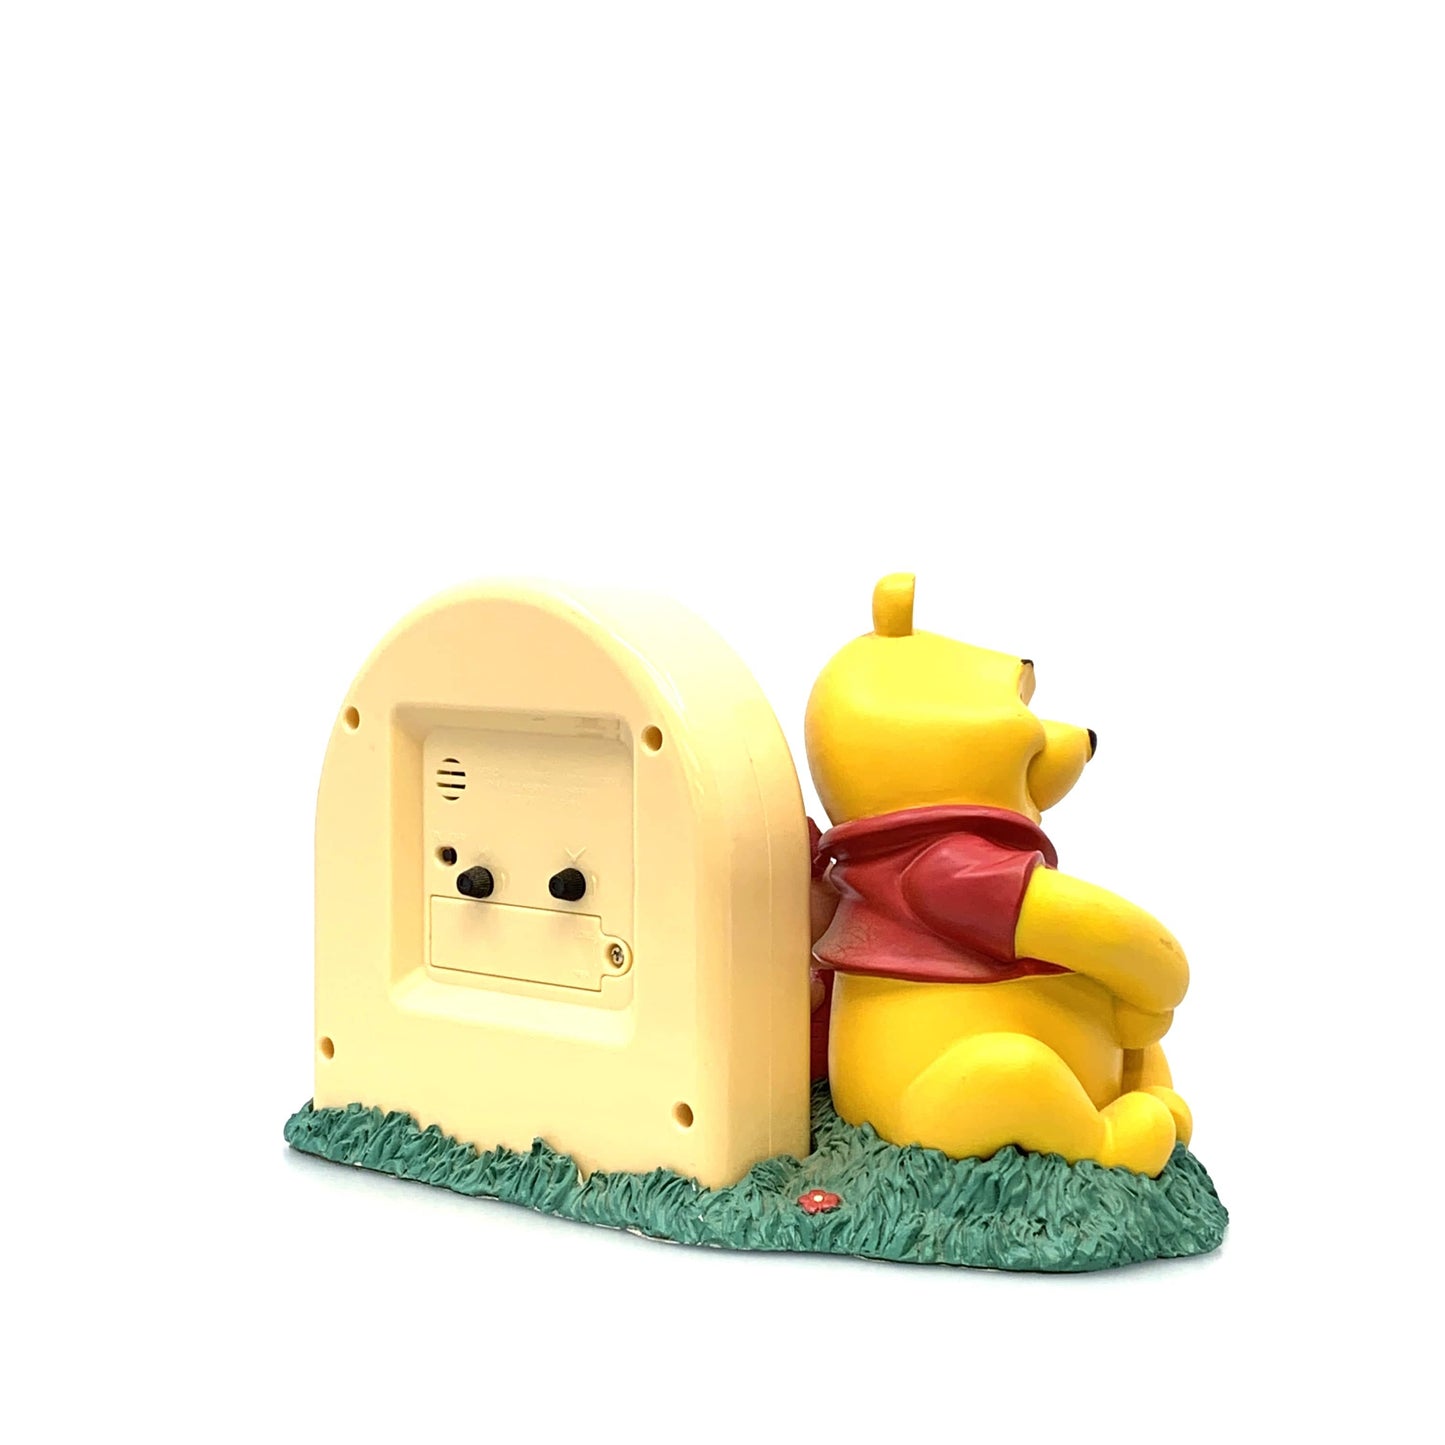 Pooh and Friends Alarm Clock with Pooh and Piglet, Resin, Tested, Works!